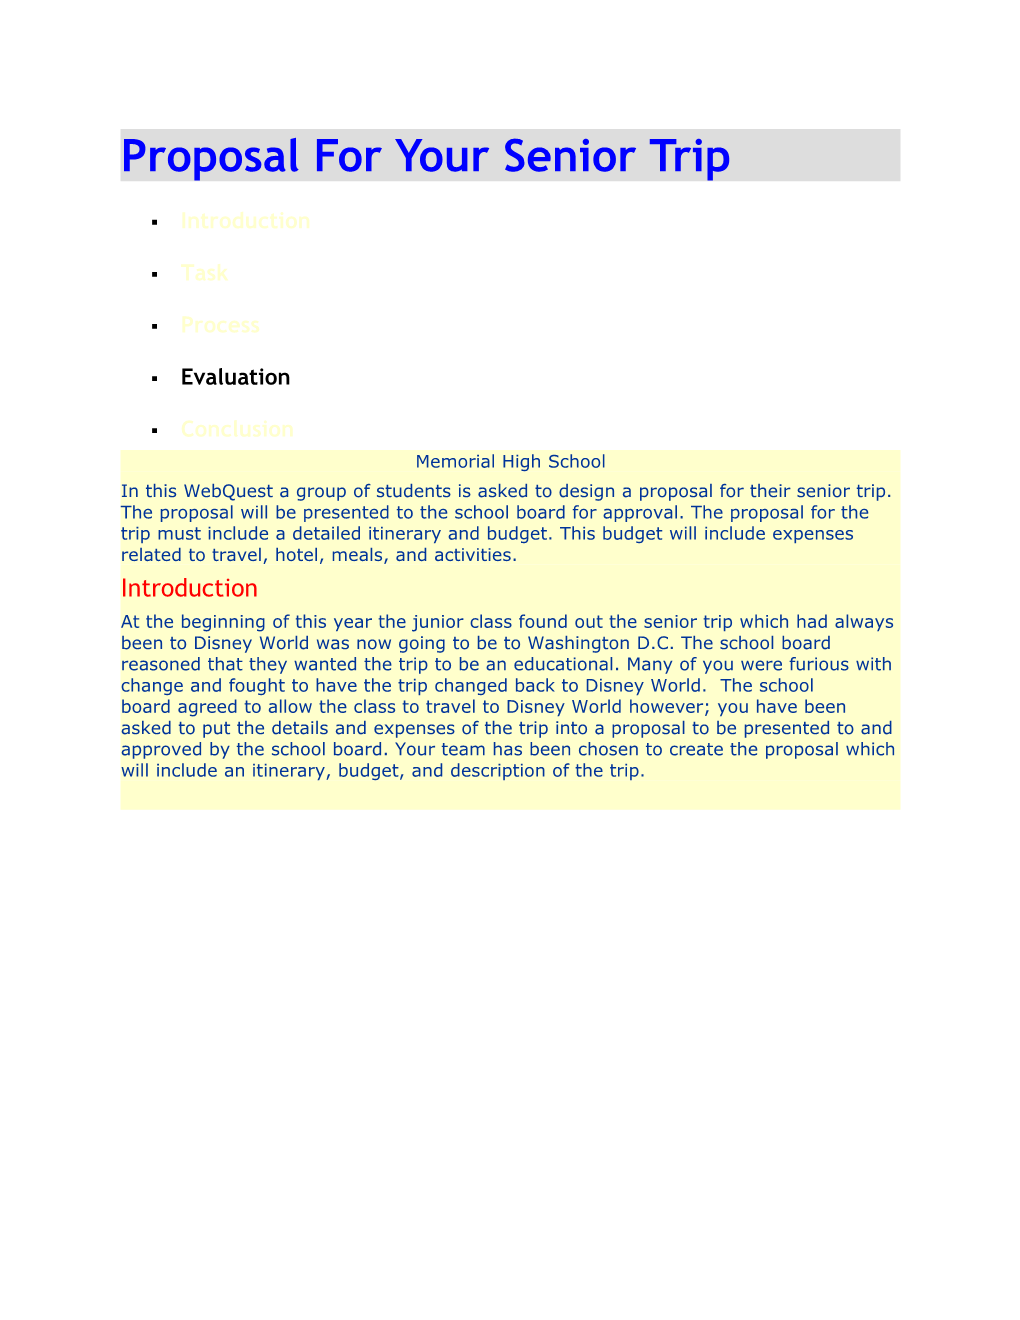 Proposal for Your Senior Trip: Introduction